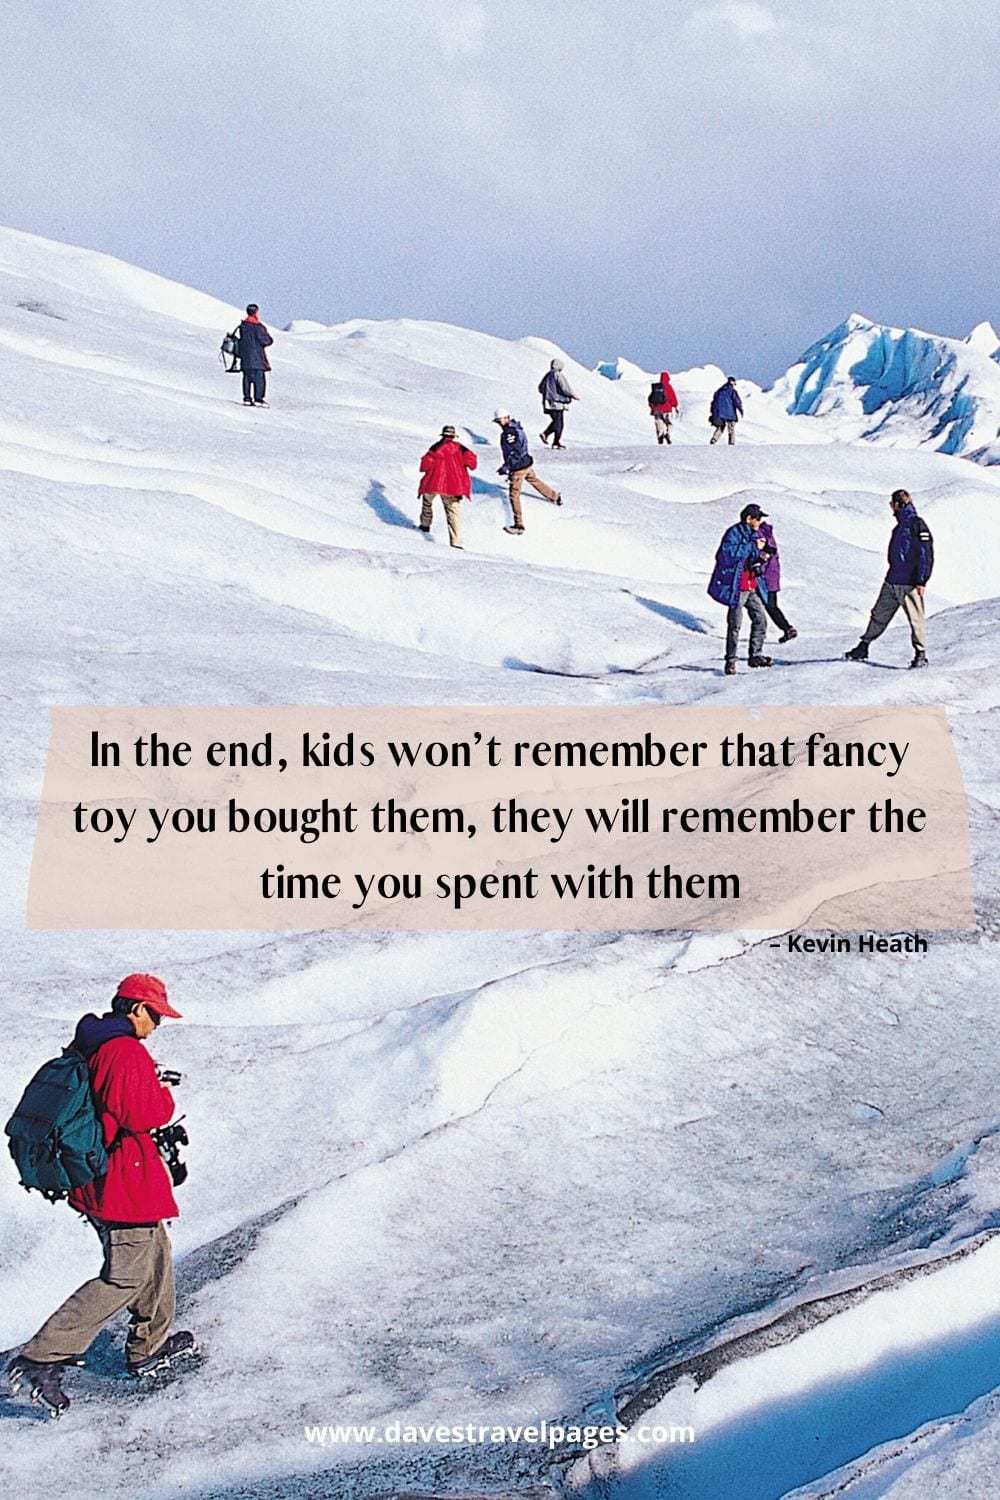 “In the end, kids won’t remember that fancy toy you bought them, they will remember the time you spent with them.” – Kevin Heath